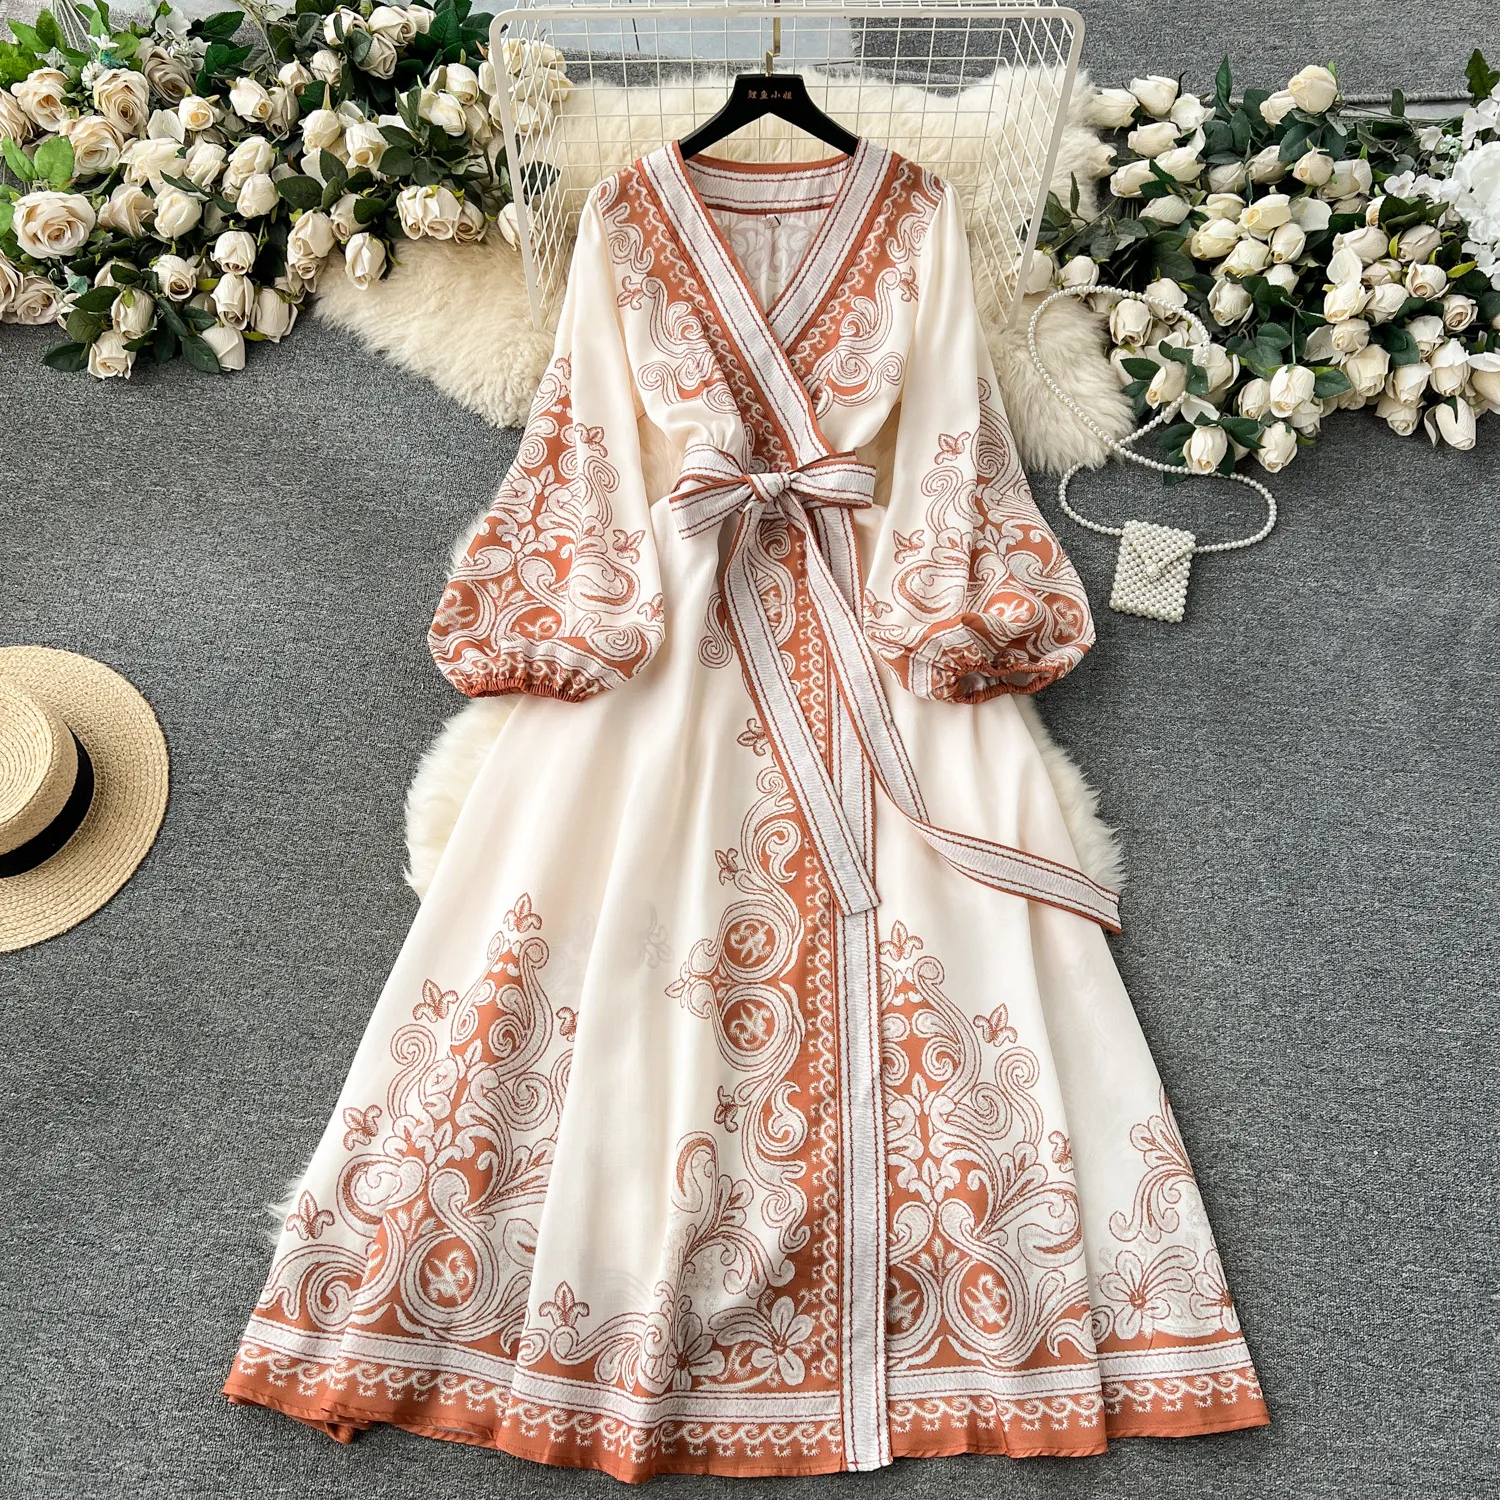 European style retro court style dress design with printed straps for slimming waist, one piece wrap around dress for women